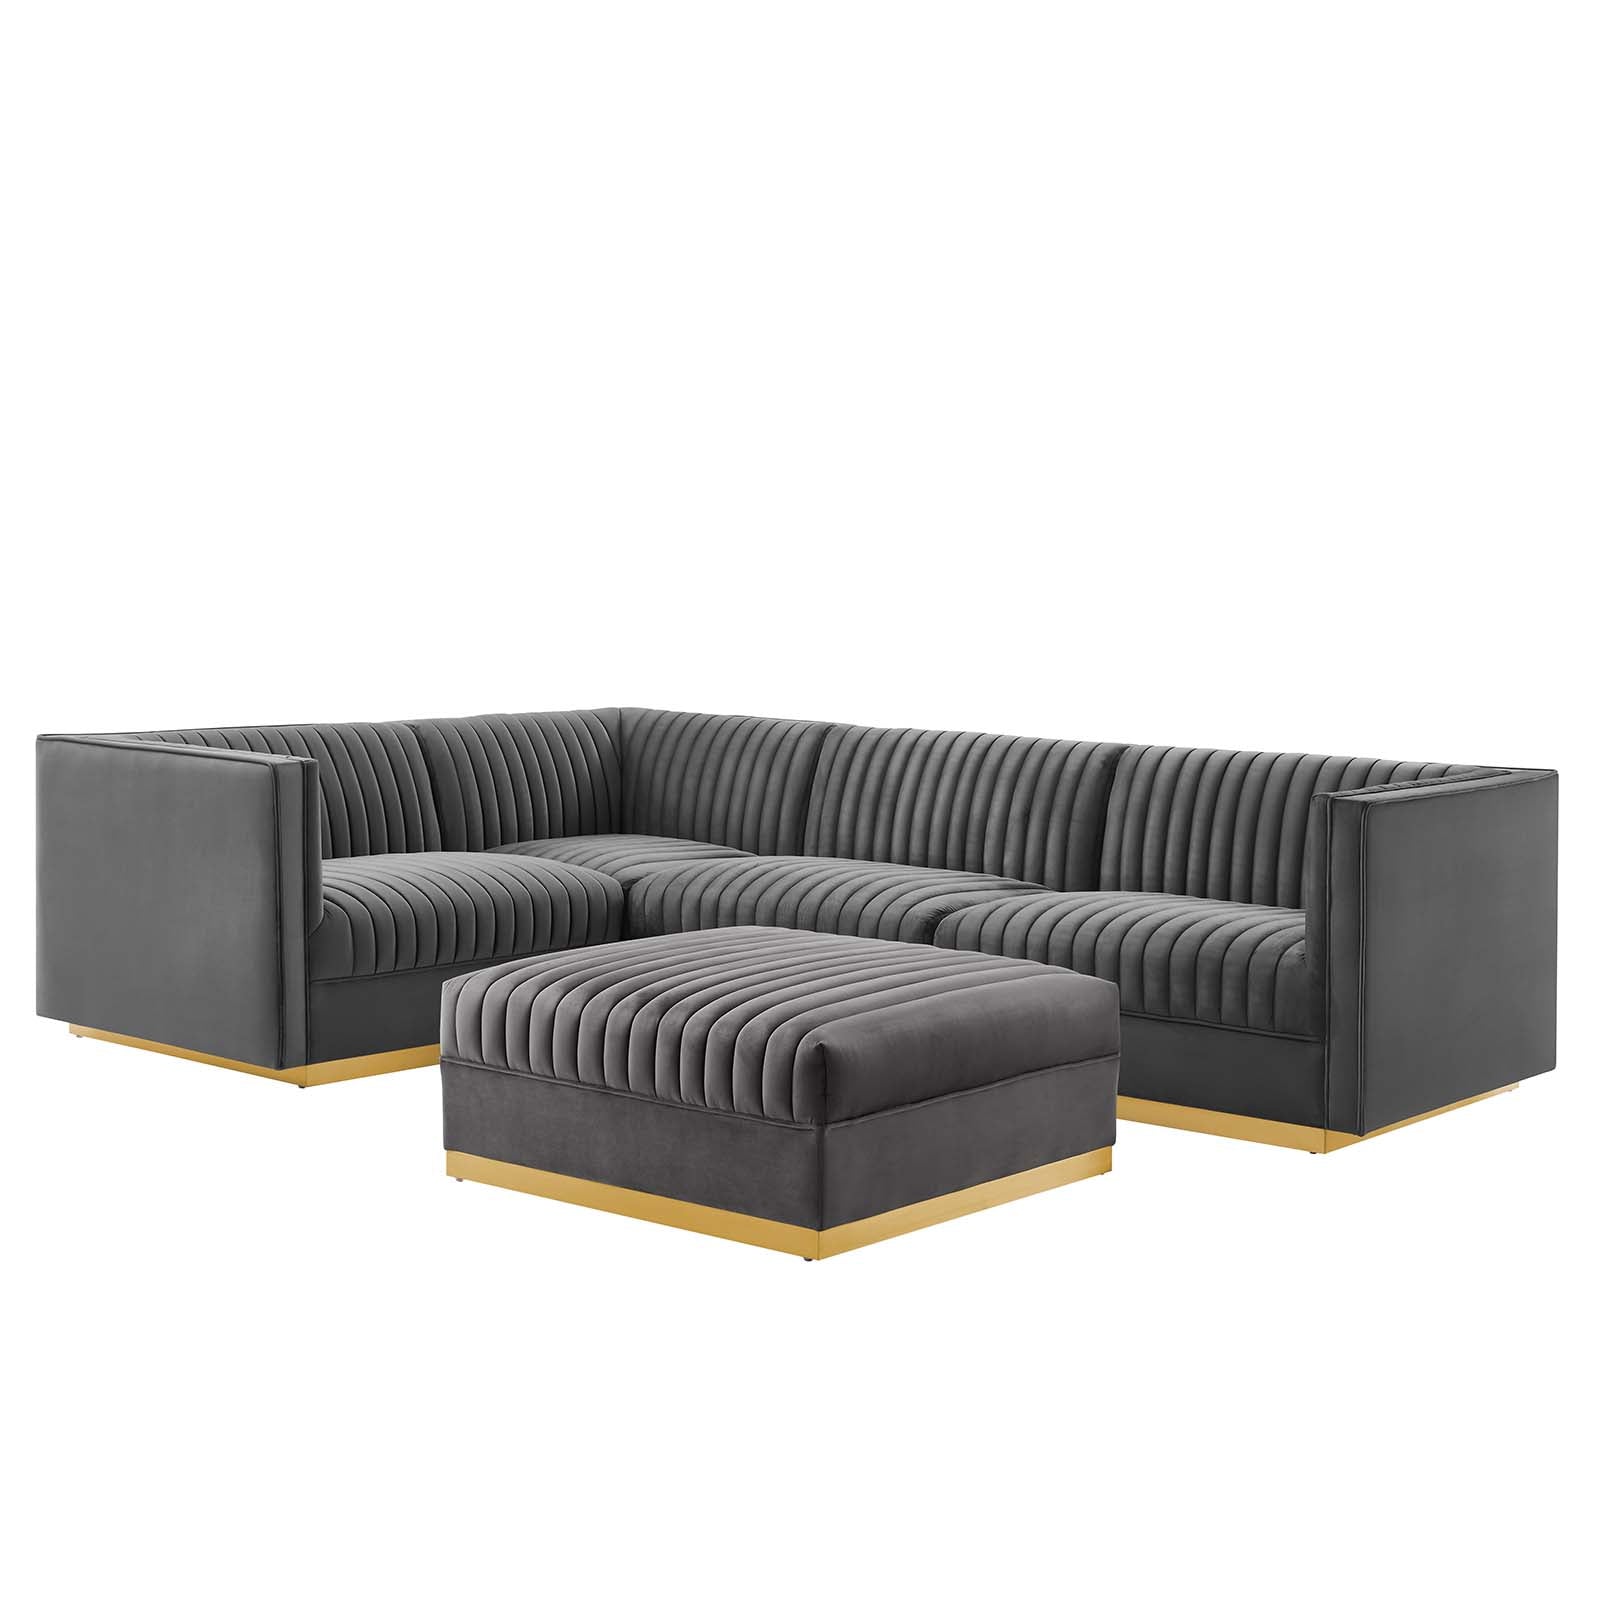 Modway Sectional Sofas - Sanguine Channel Tufted Performance Velvet 5 Piece Left-Facing Modular Sectional Sofa Gray